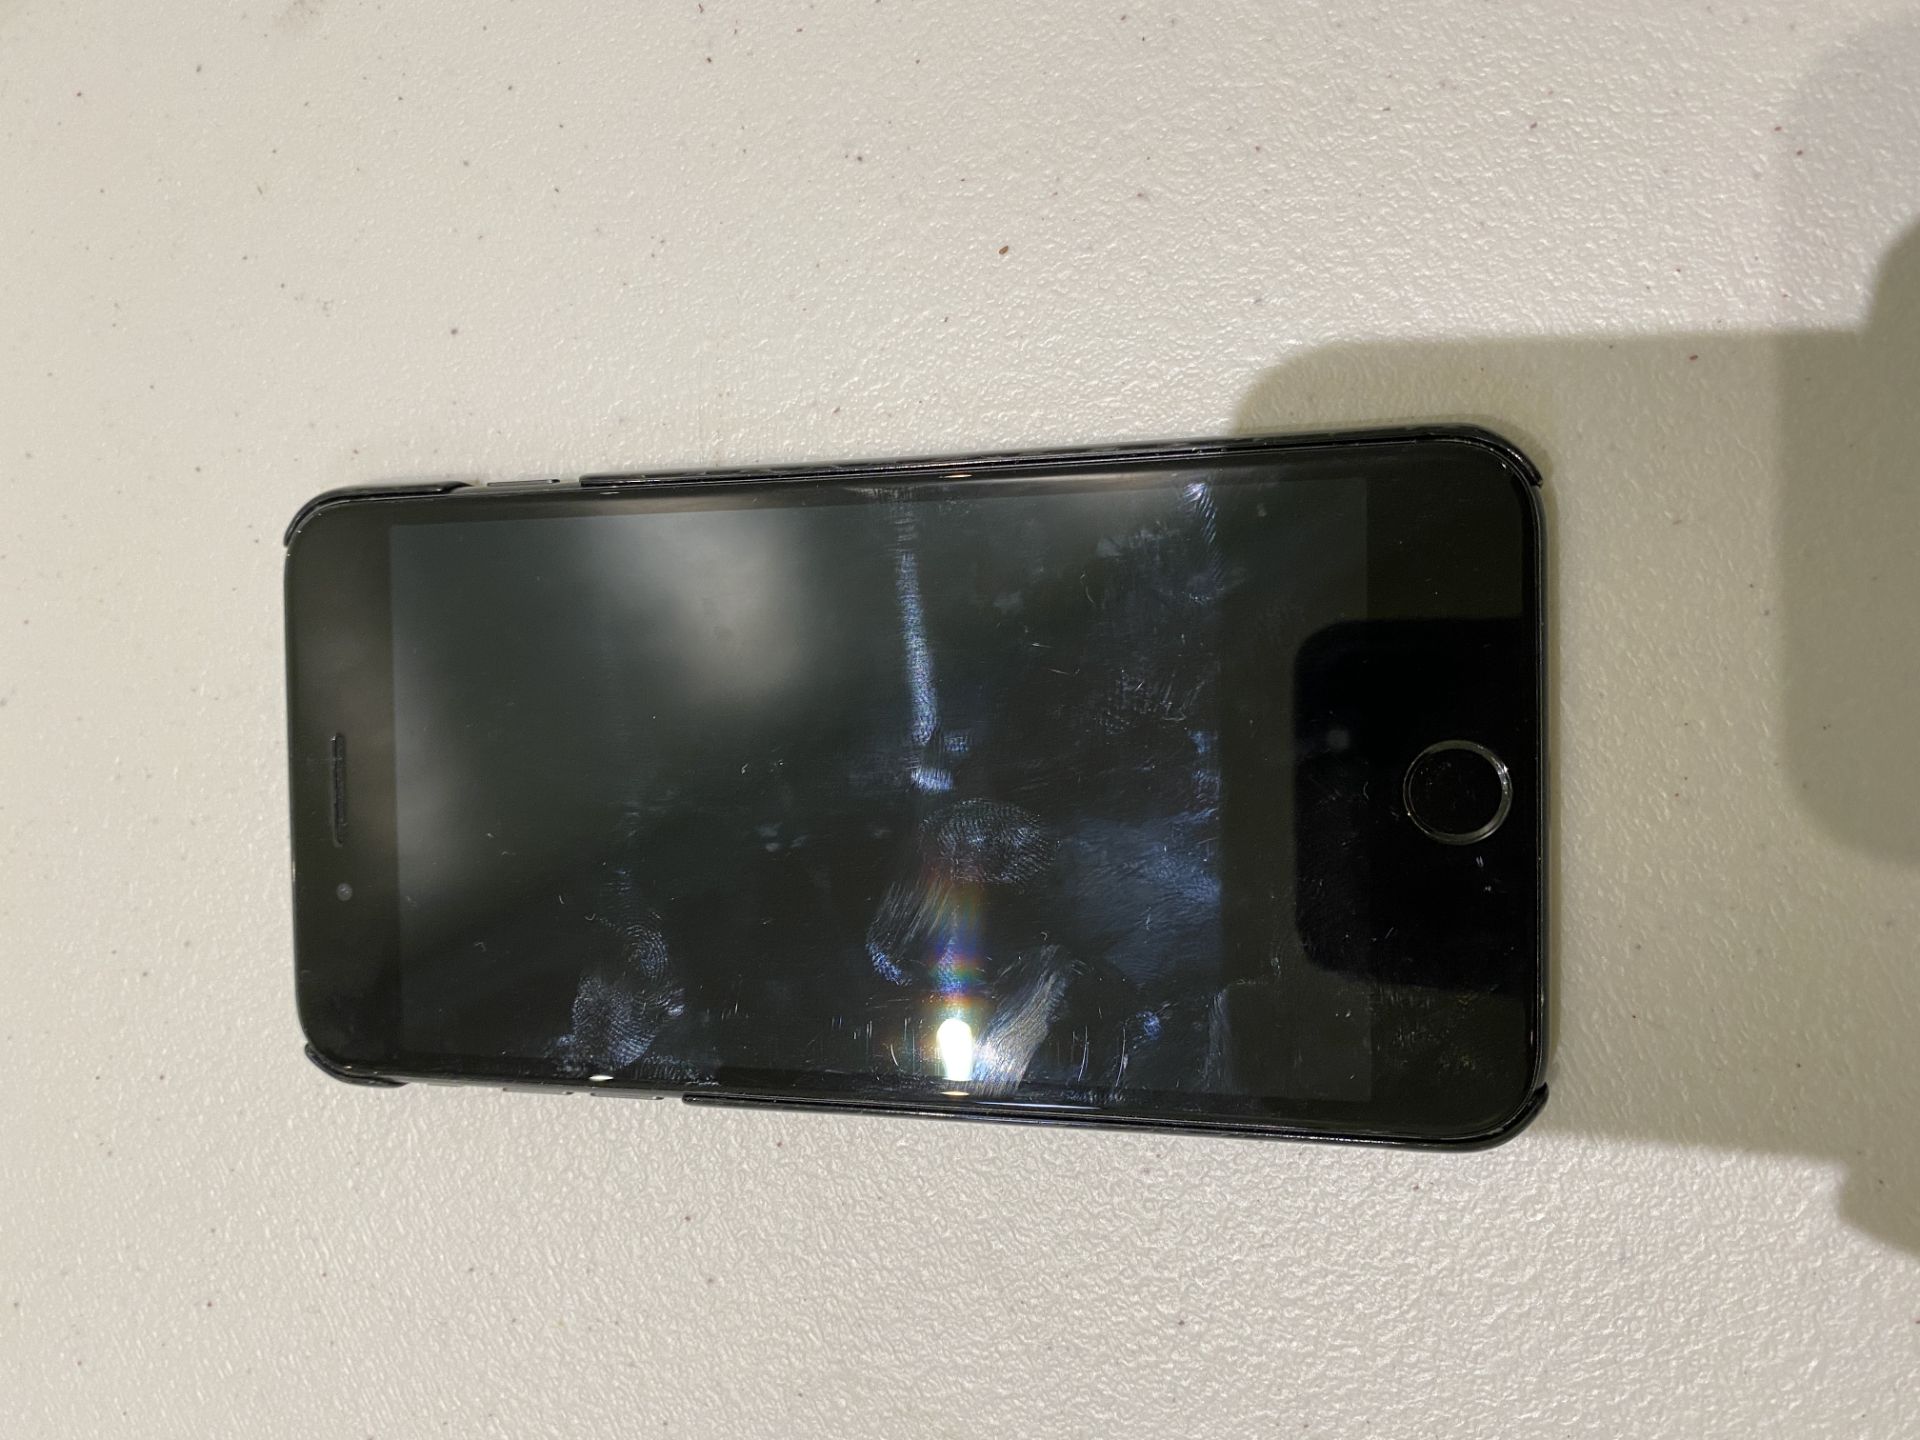 Apple Iphone 6 Plus 64 GB - Black - Had New Screen Fitted, Which is Now Unresponsive - Has Been Fact - Image 2 of 5